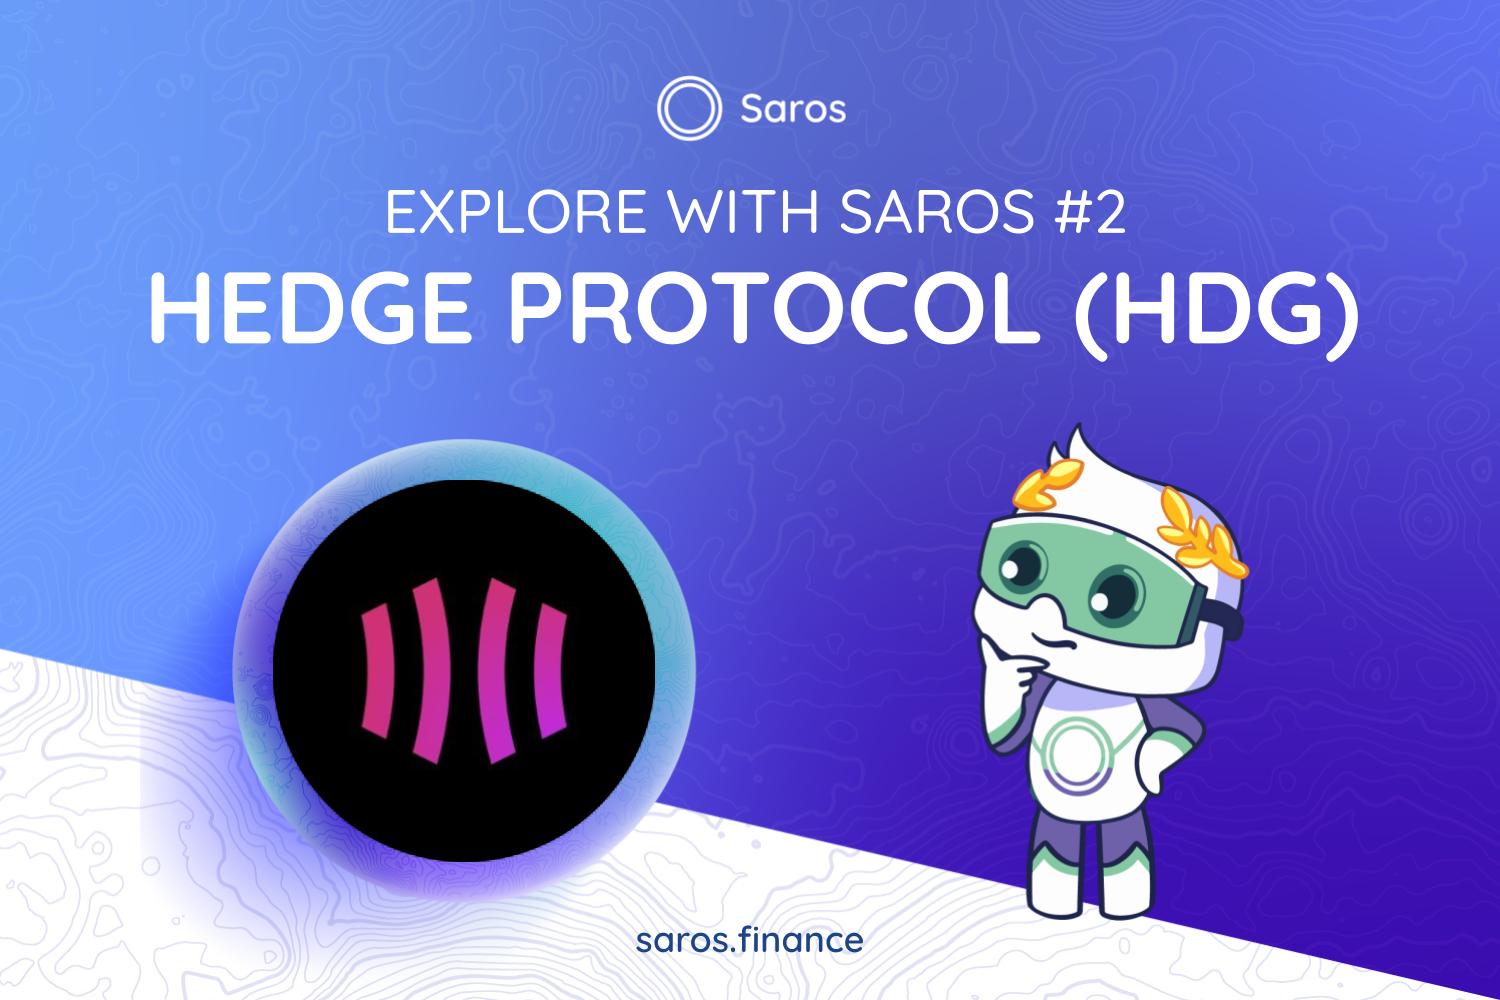 Explore with Saros #2: Everything you need to know about Hedge Protocol (HDG)